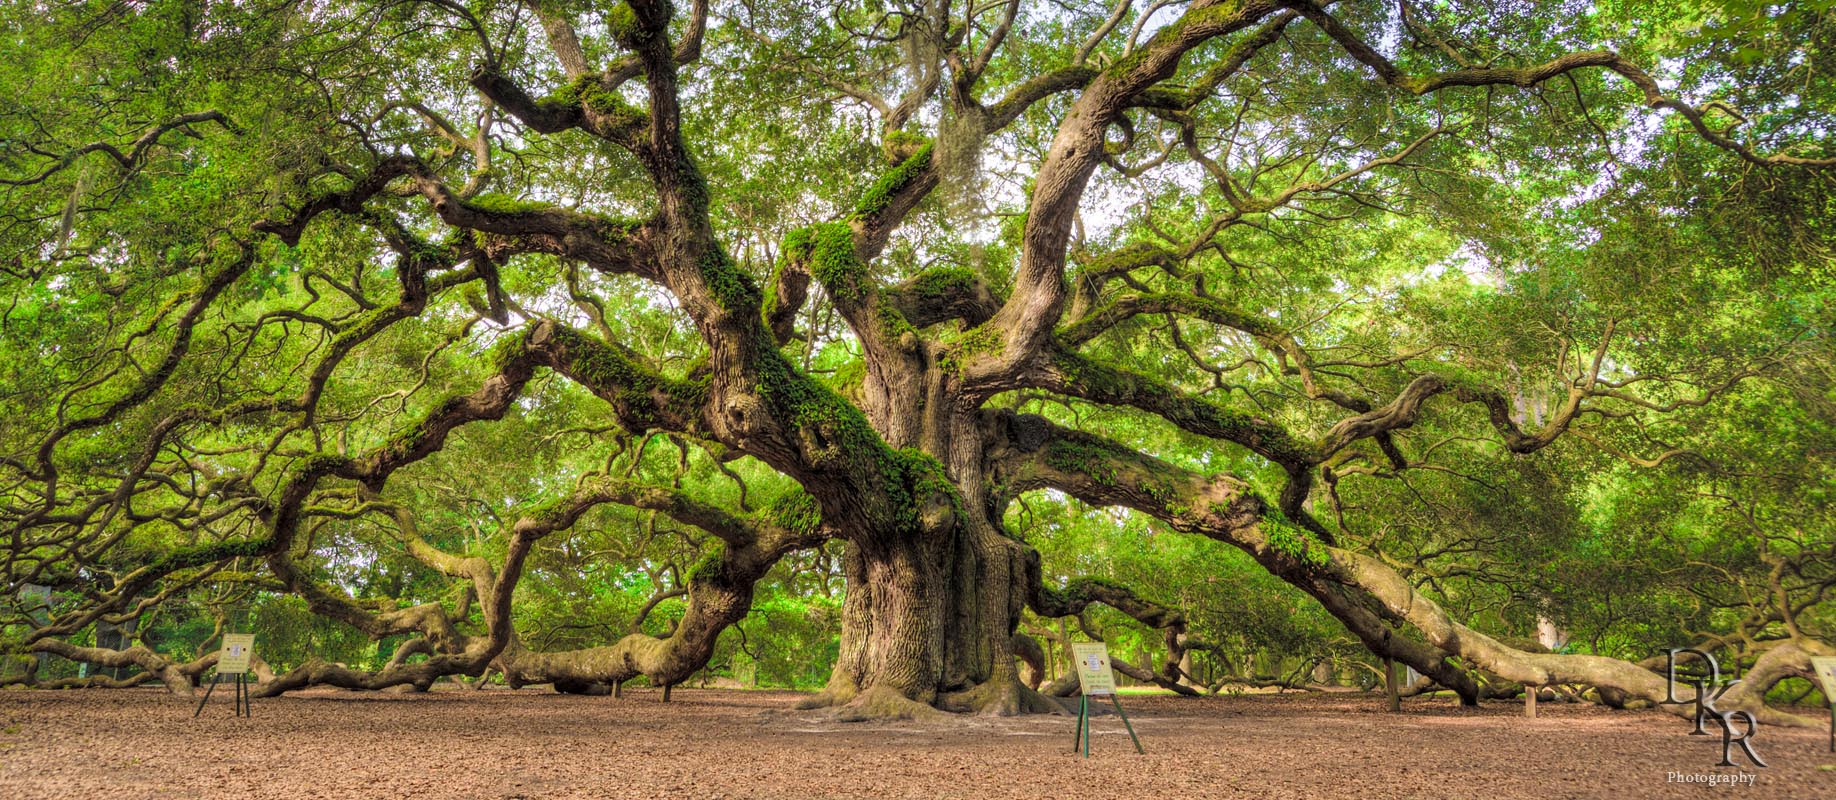 Amazing Angel Oak Tree Pictures & Backgrounds